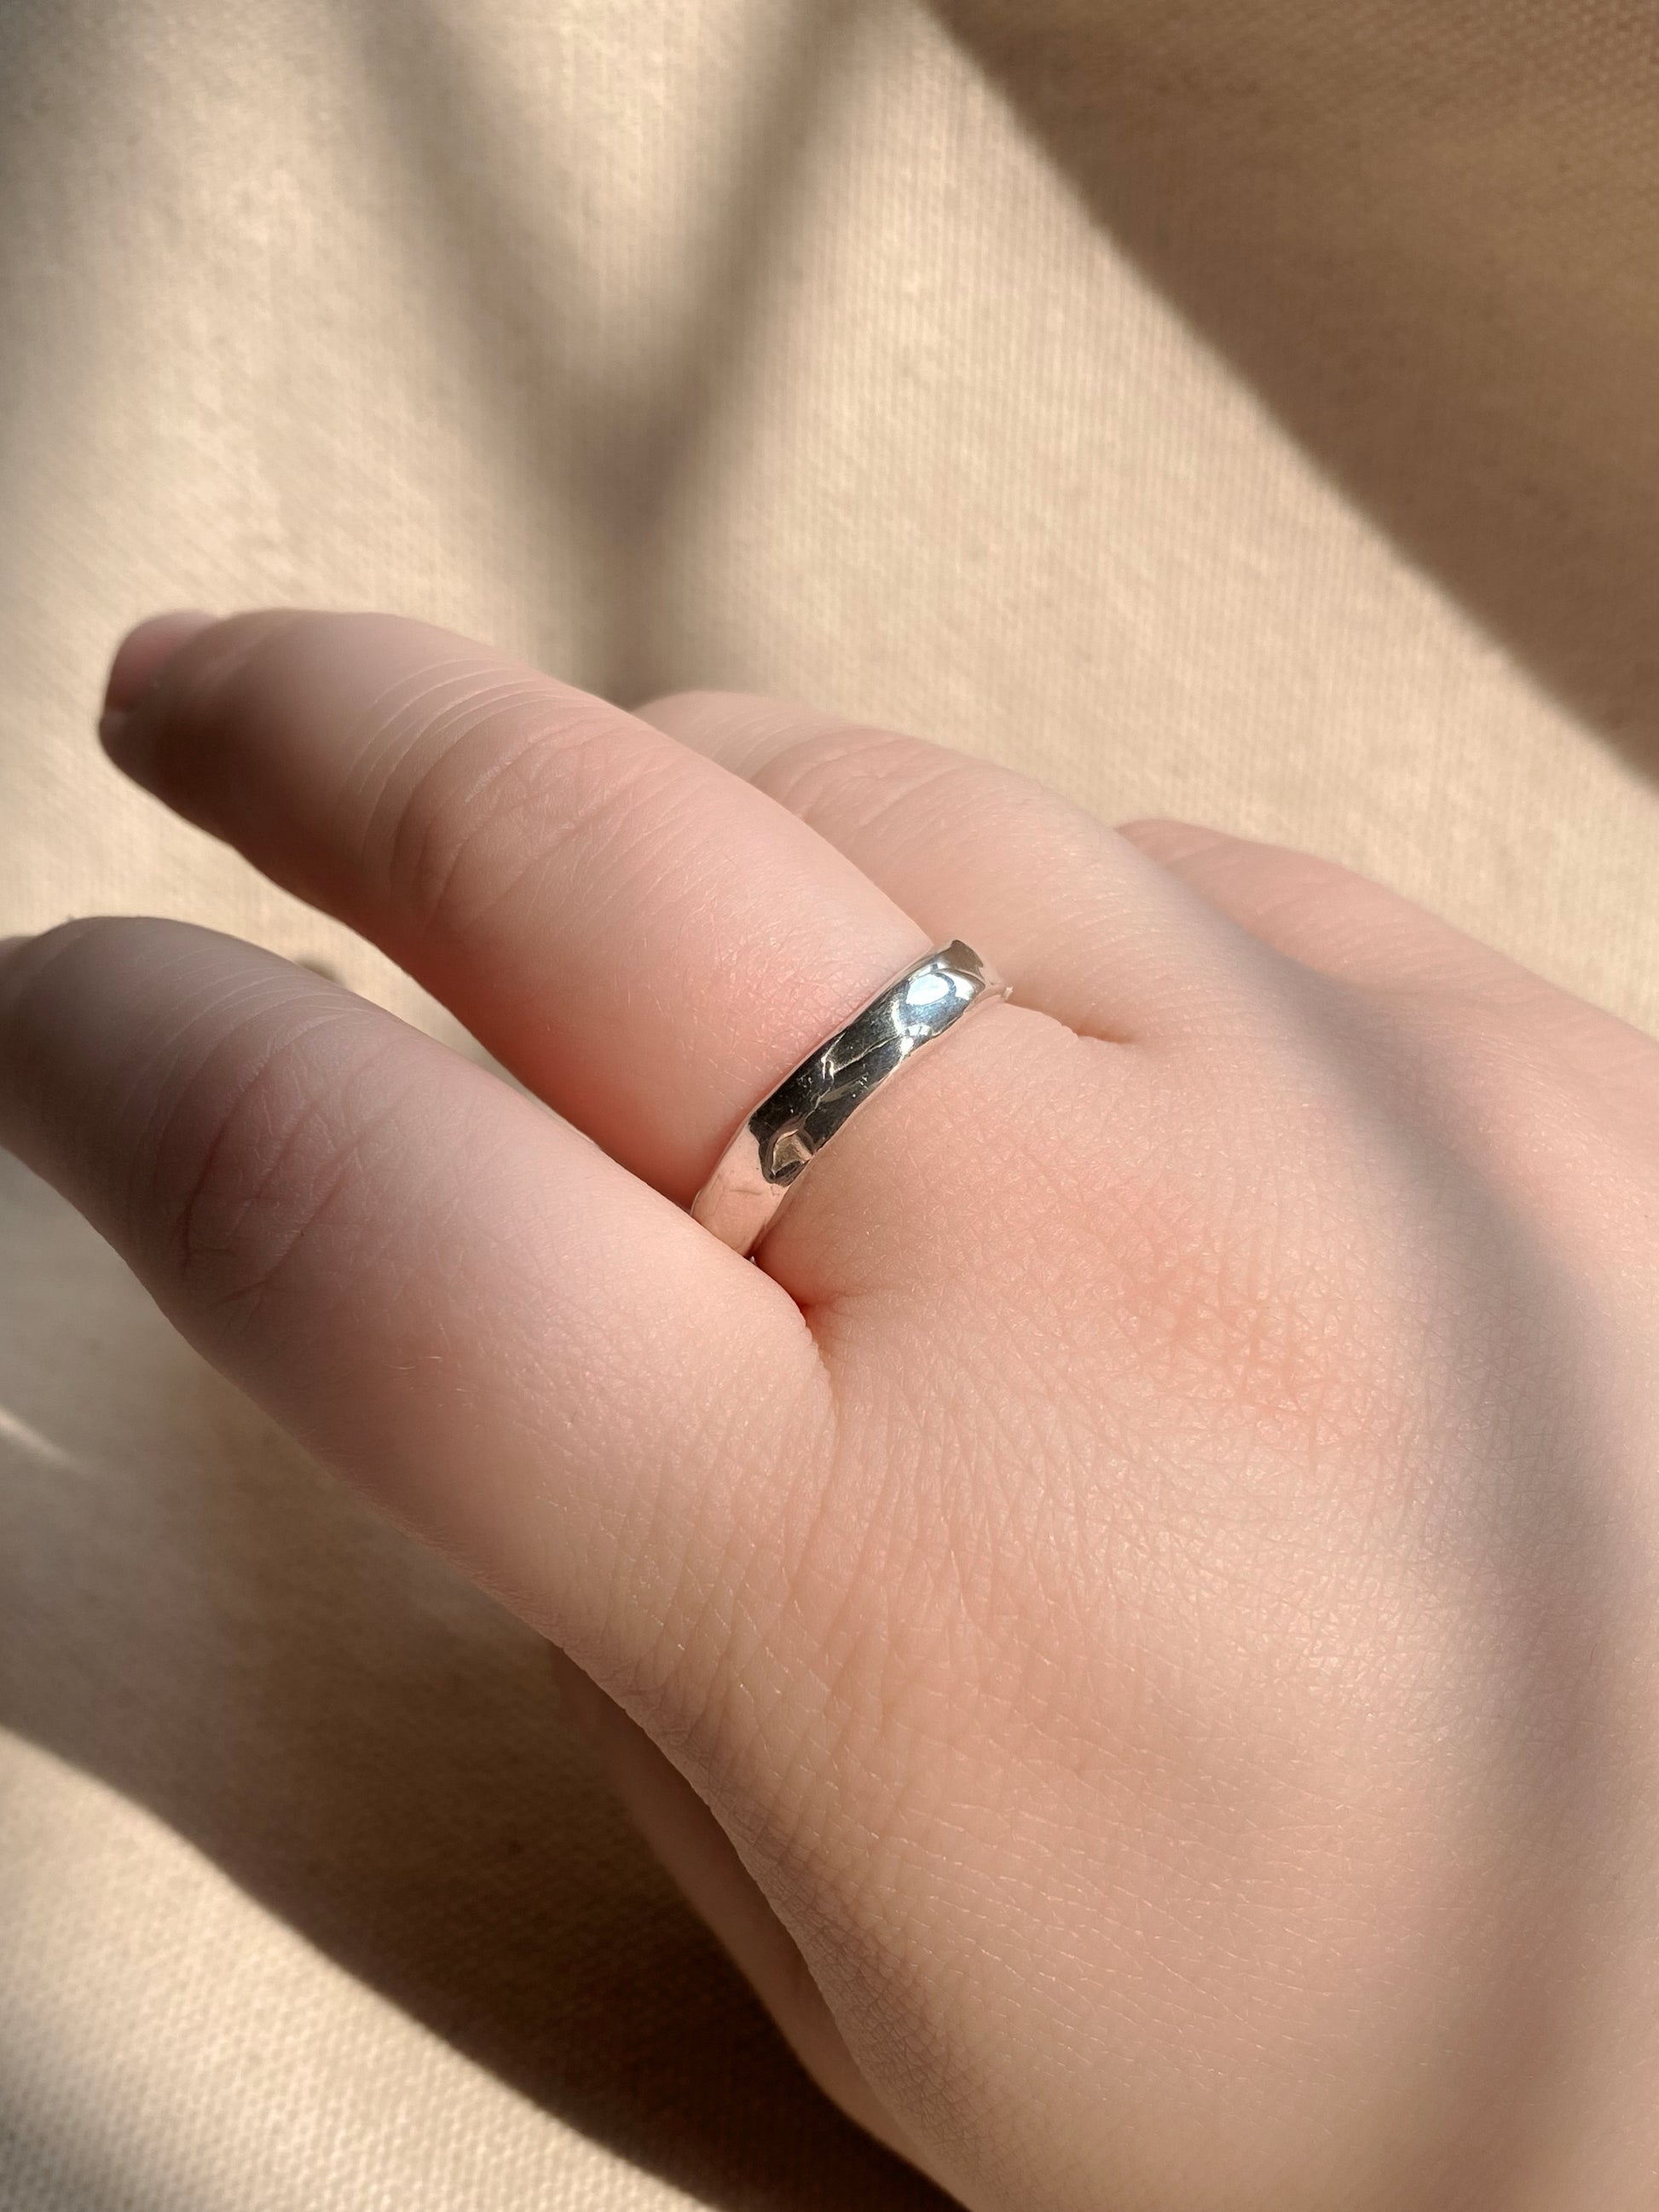 Unique textured silver ring on hand